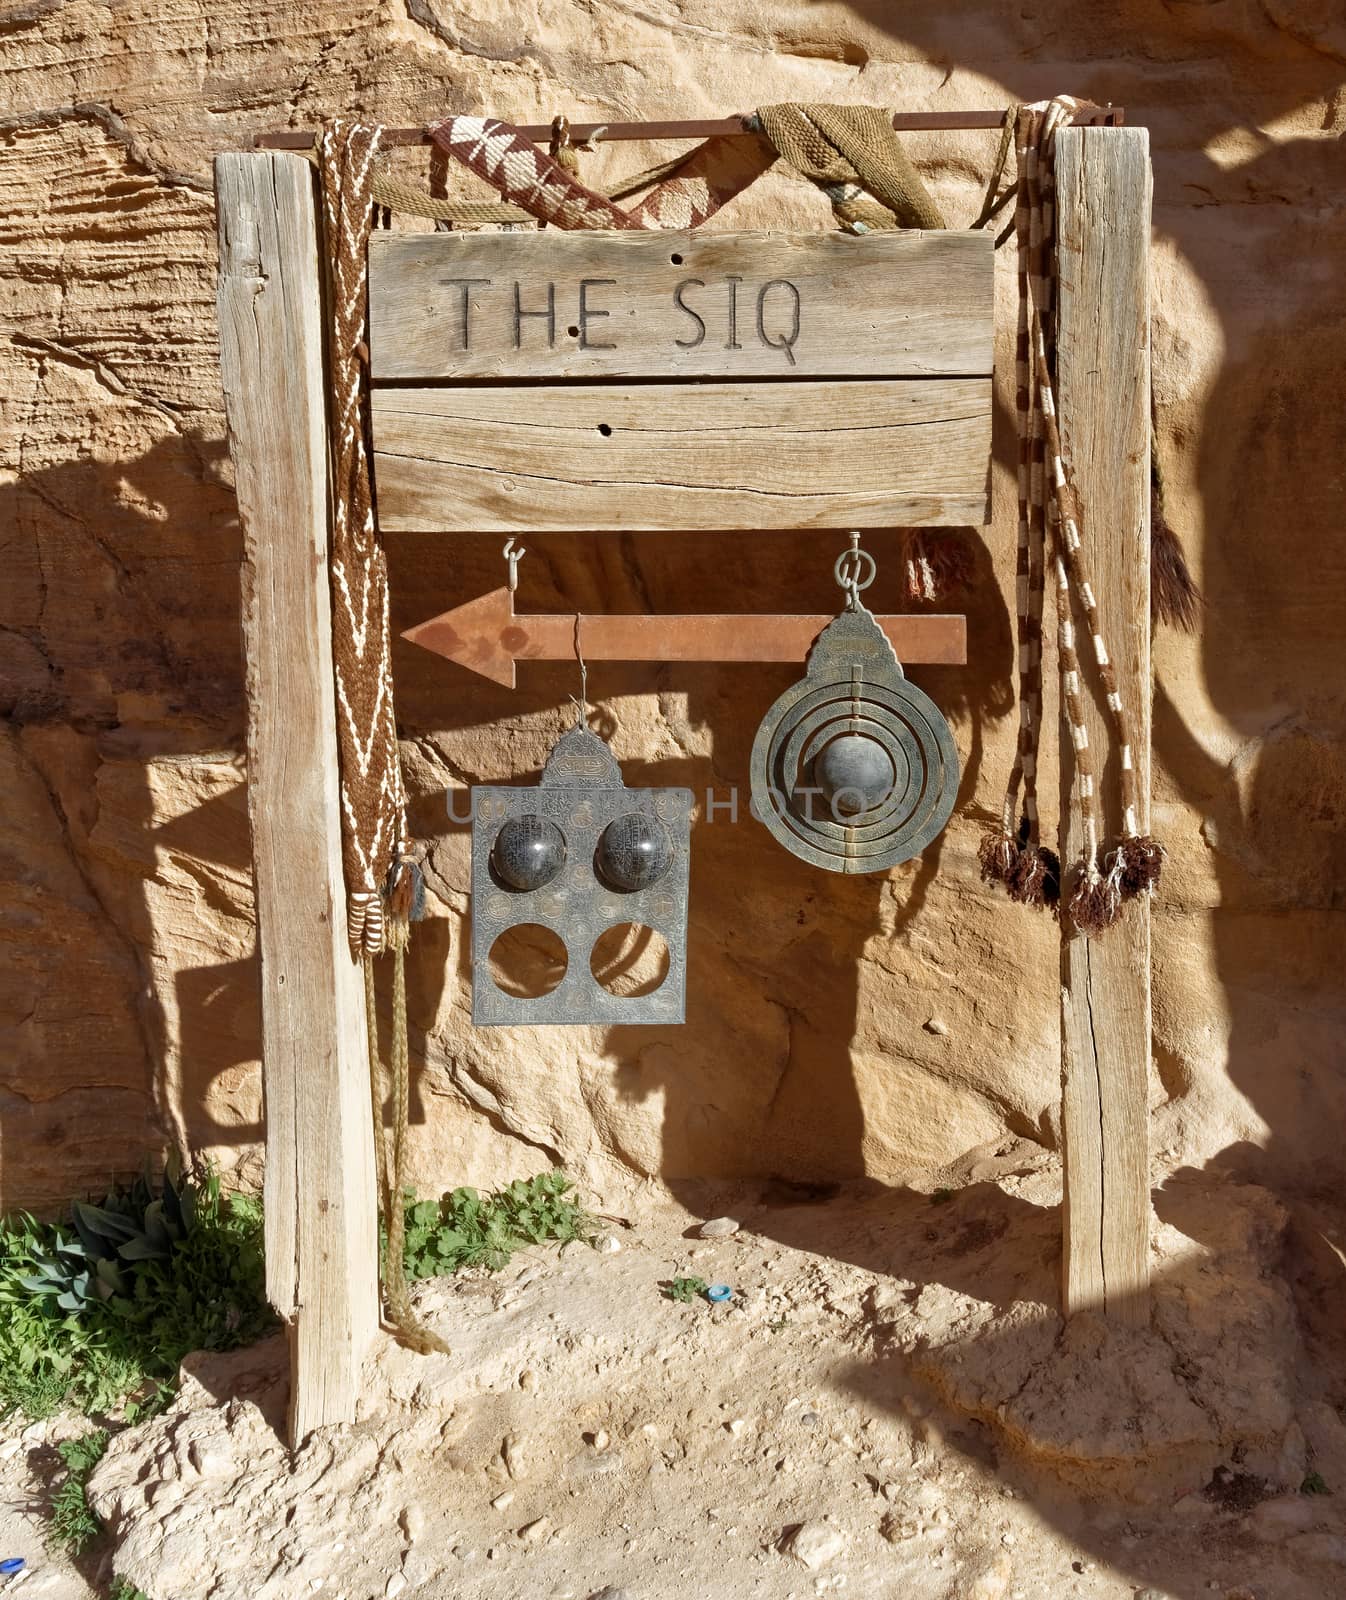 Sign for the entrance to the Siq of Petra, from the Visitor Centre in Wadi Musa, Jordan, middle east